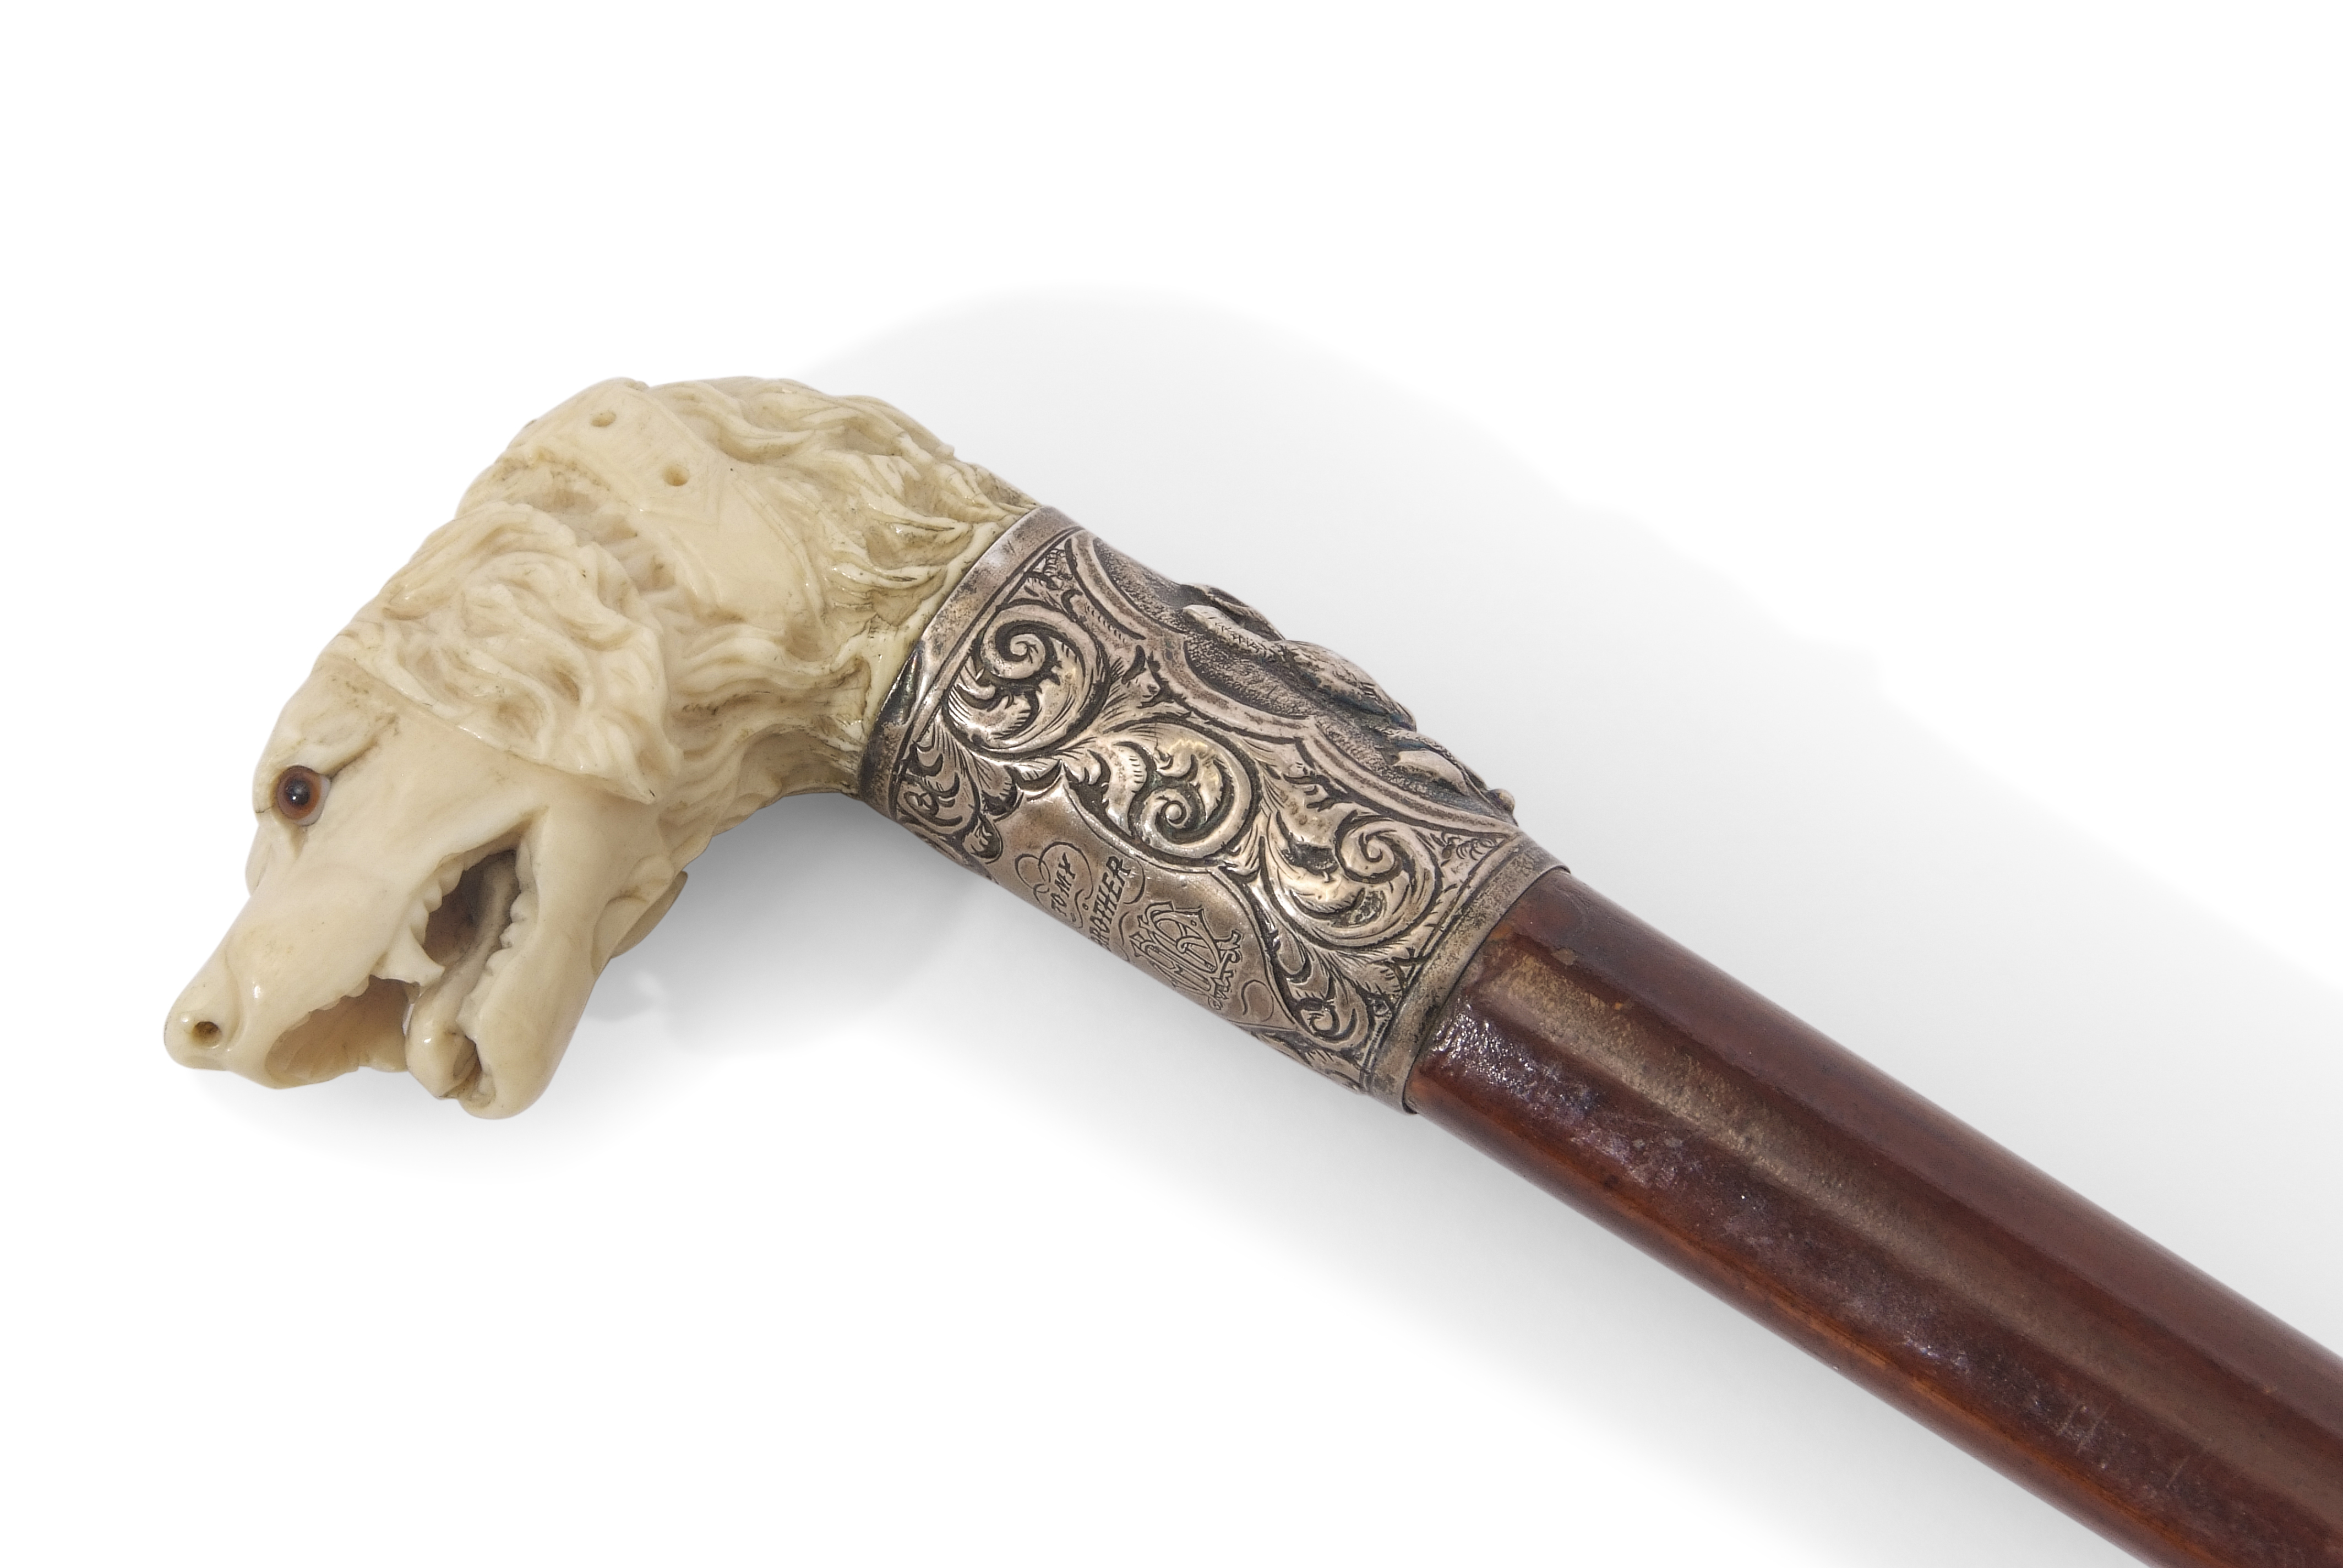 19th century hunting cane, the ivory handle carved in the form of a hound with glass or